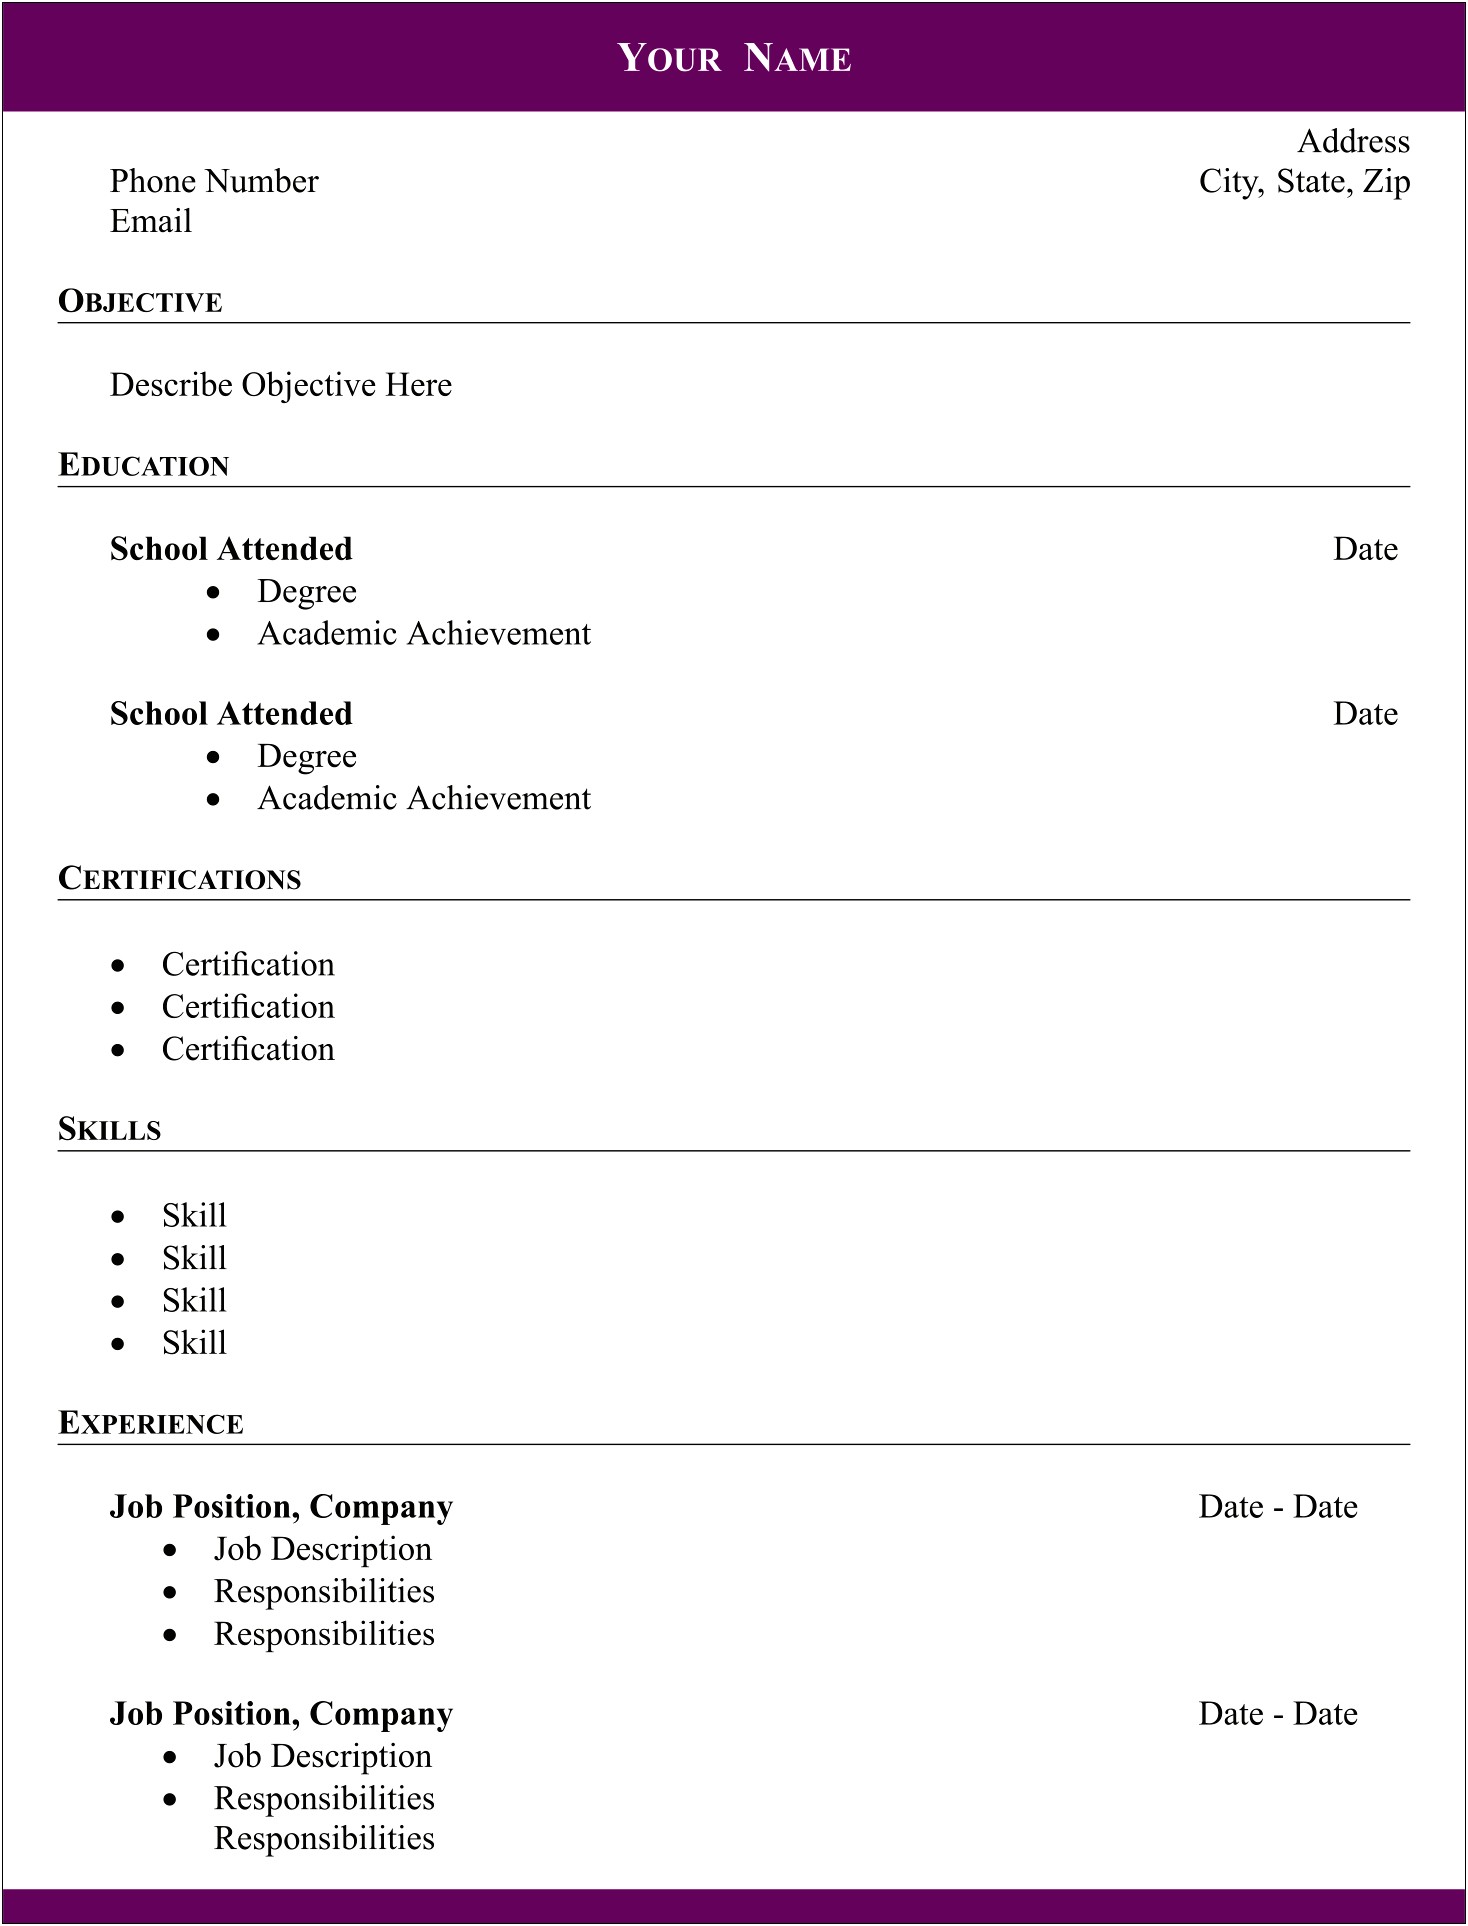 Resume Templates That Are Free And Printable